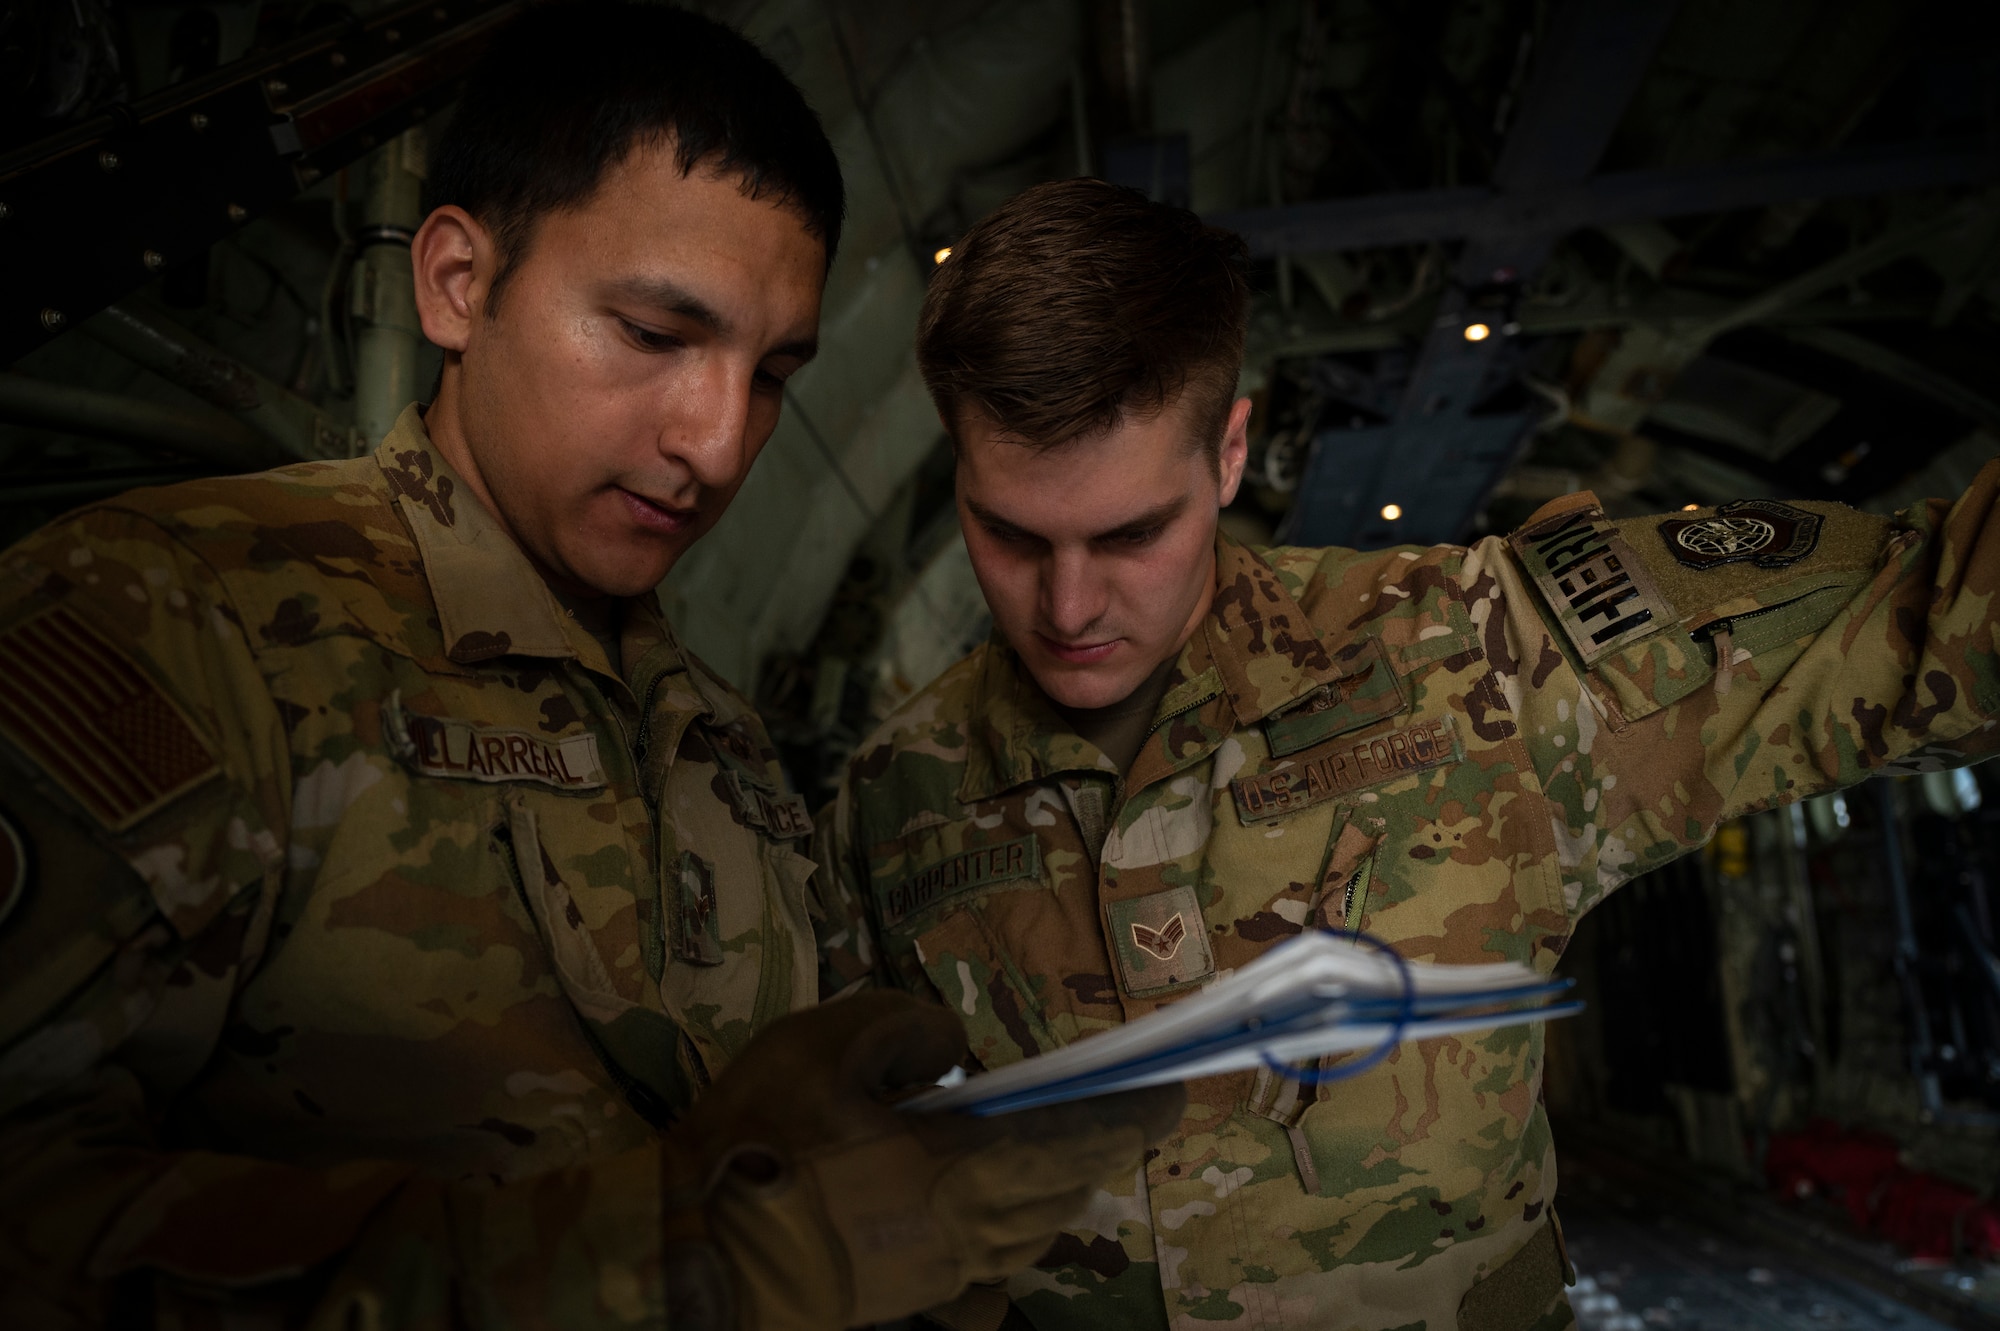 U.S. Air Force Airman 1st Class Jorge Villarreal, left, and U.S. Air Force Senior Airman Jacob Carpenter, loadmasters assigned to the 41st Airlift Squadron, review cargo checklists on a U.S. Air Force C-130J Super Hercules assigned to the 19th Airlift Wing at Alpena Combat Readiness Training Center, Michigan, May 21, 2021. Mobility Guardian accelerates change for the Air Force and Air Mobility Command by developing the force and advancing warfighting capabilities to enhance our ability to project the Joint Force and ensure strategic deterrence. (U.S. Air Force photo by Staff Sgt. Joseph Pick)